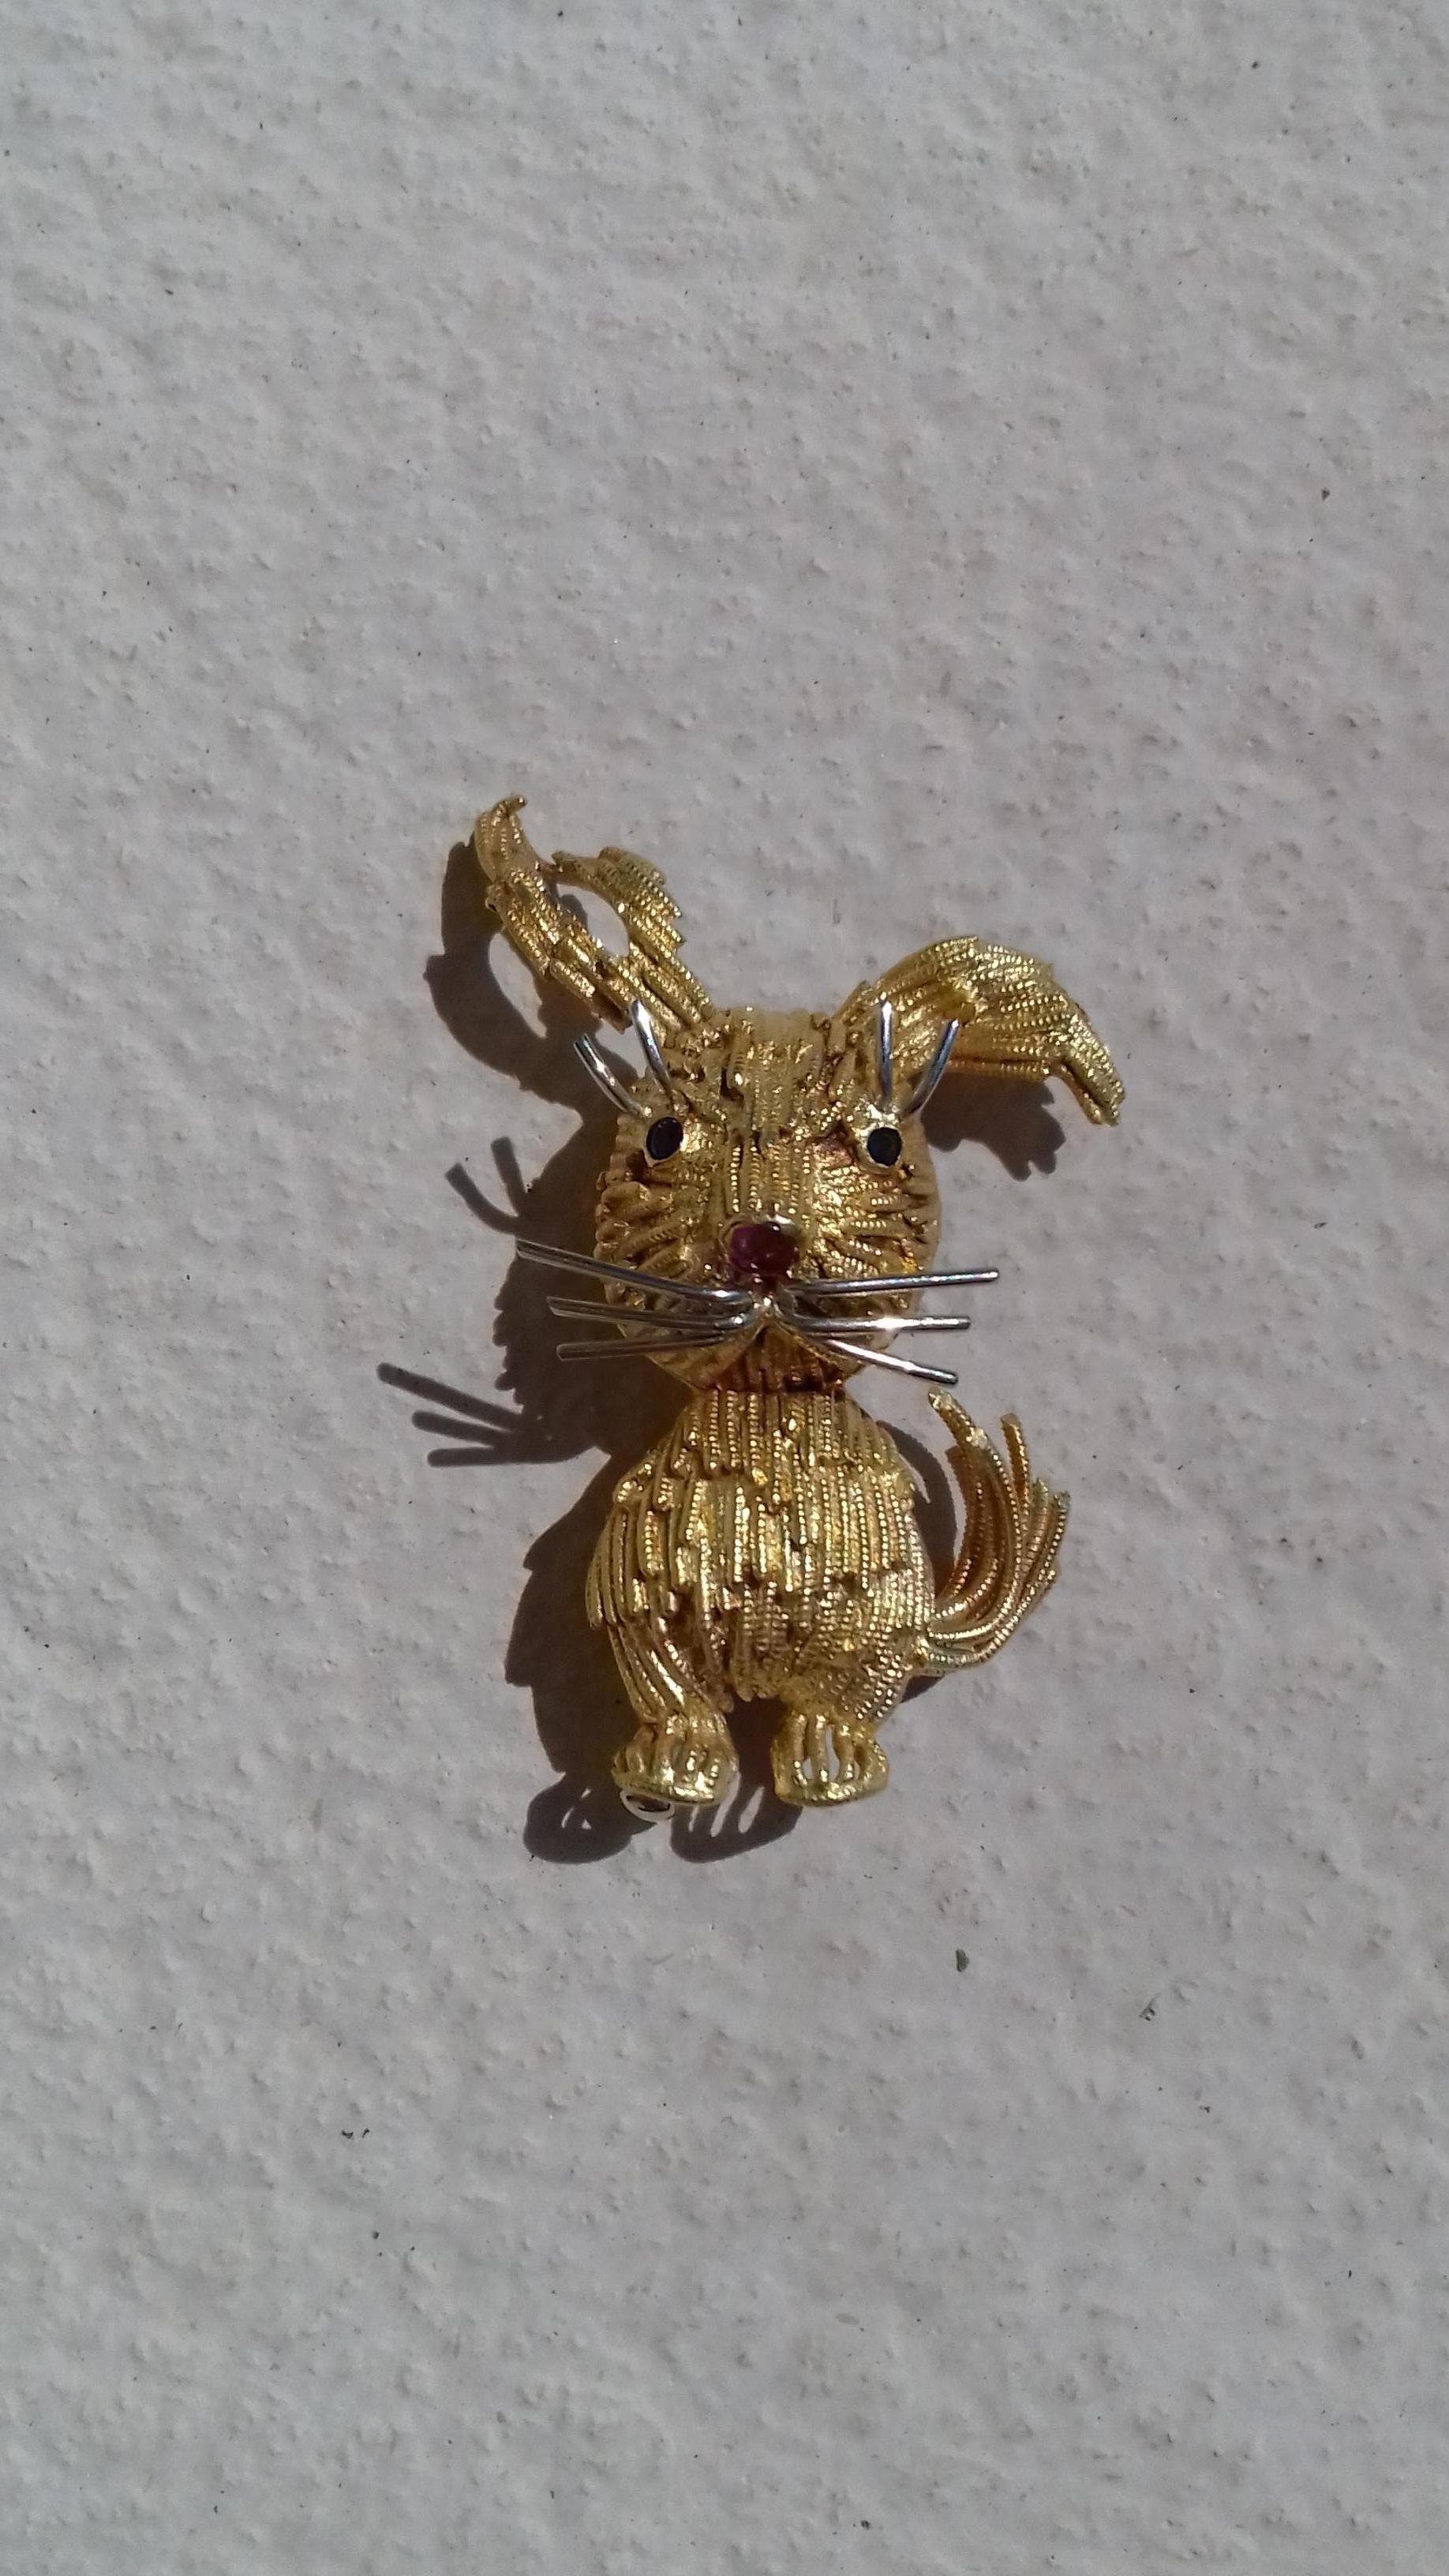 Super Cute Brooch

Pattern: Rabbit

The hairs are made of yellow gold threads (18k)

The eyelashes and mustaches in white gold

The eyes are sapphires and the muzzle is ruby

Measurements: 4,5 cm at heighest, 3 cm at widest (ears) (1,77 x 1,18